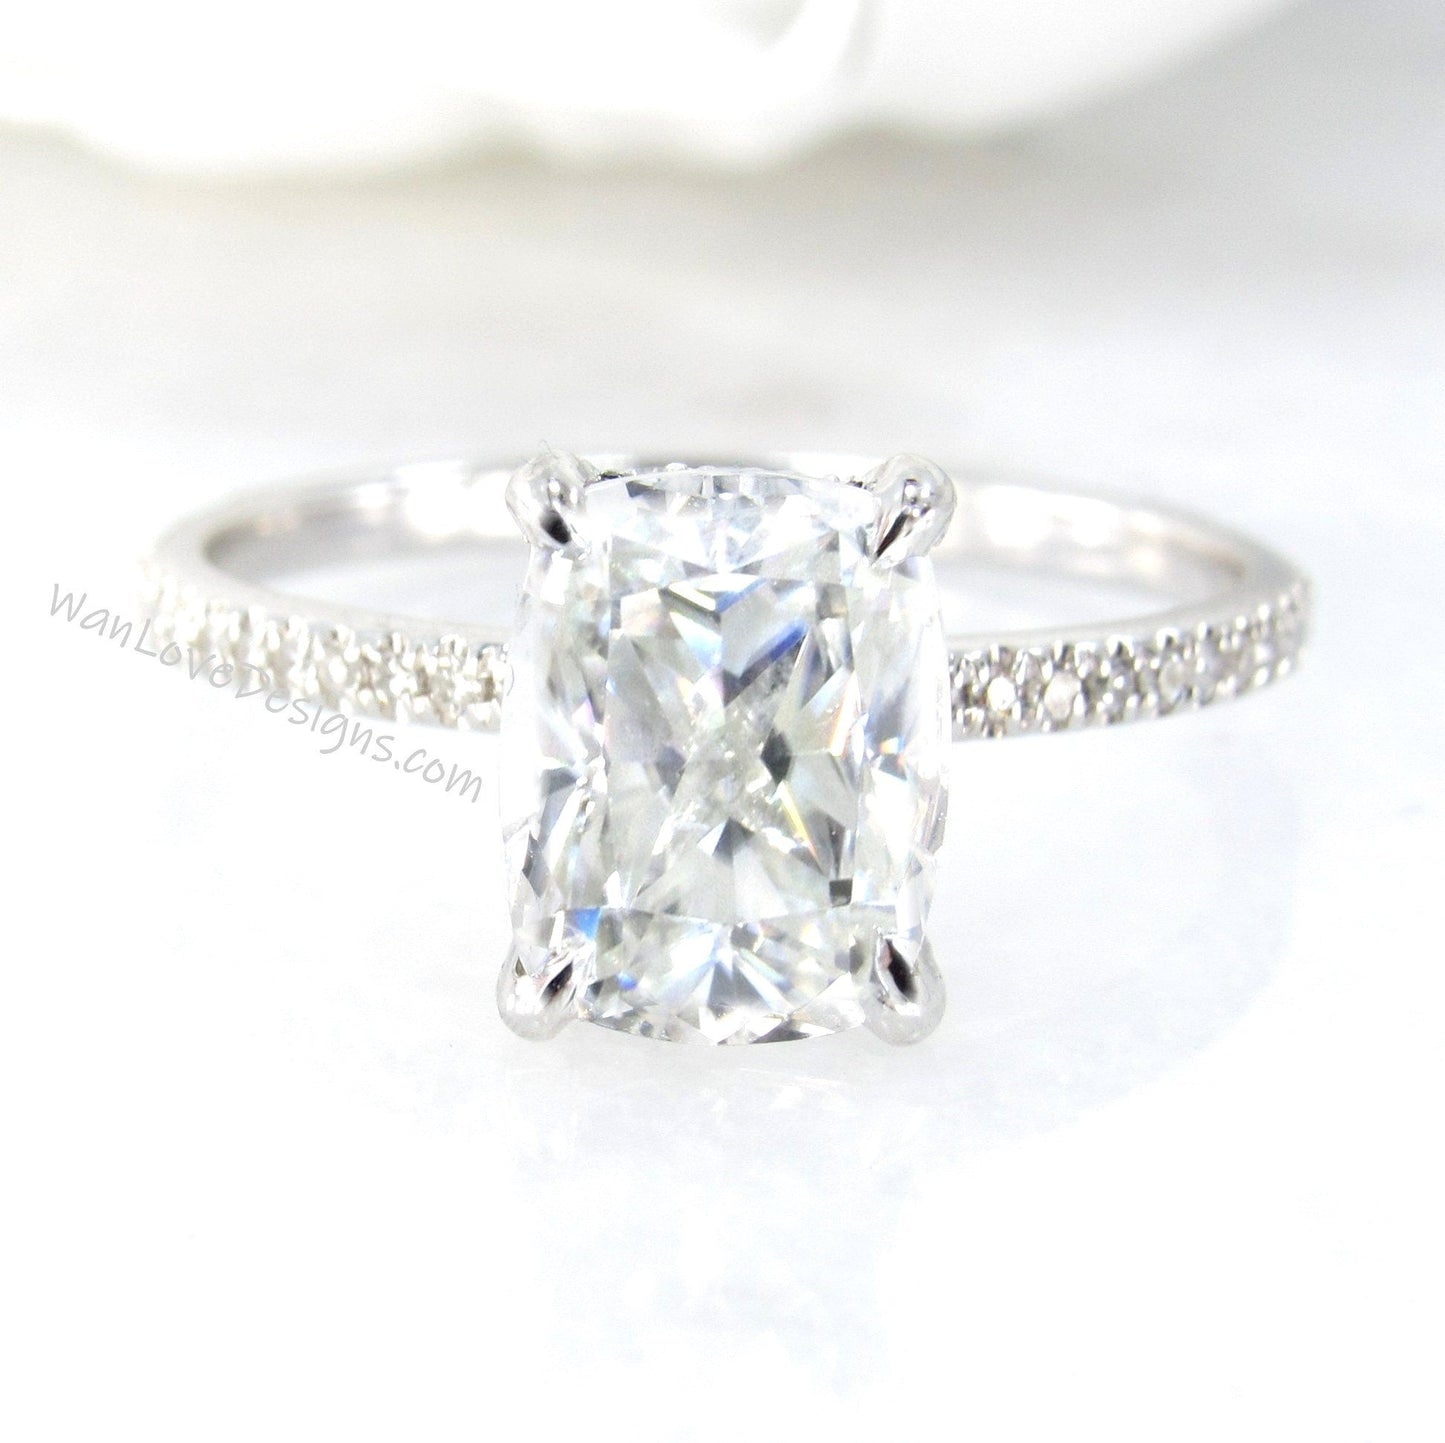 Elongated cushion shape Diamond engagement ring vintage White gold diamond halo ring unique Certified Diamond ring Anniversary promise ring Wan Love Designs